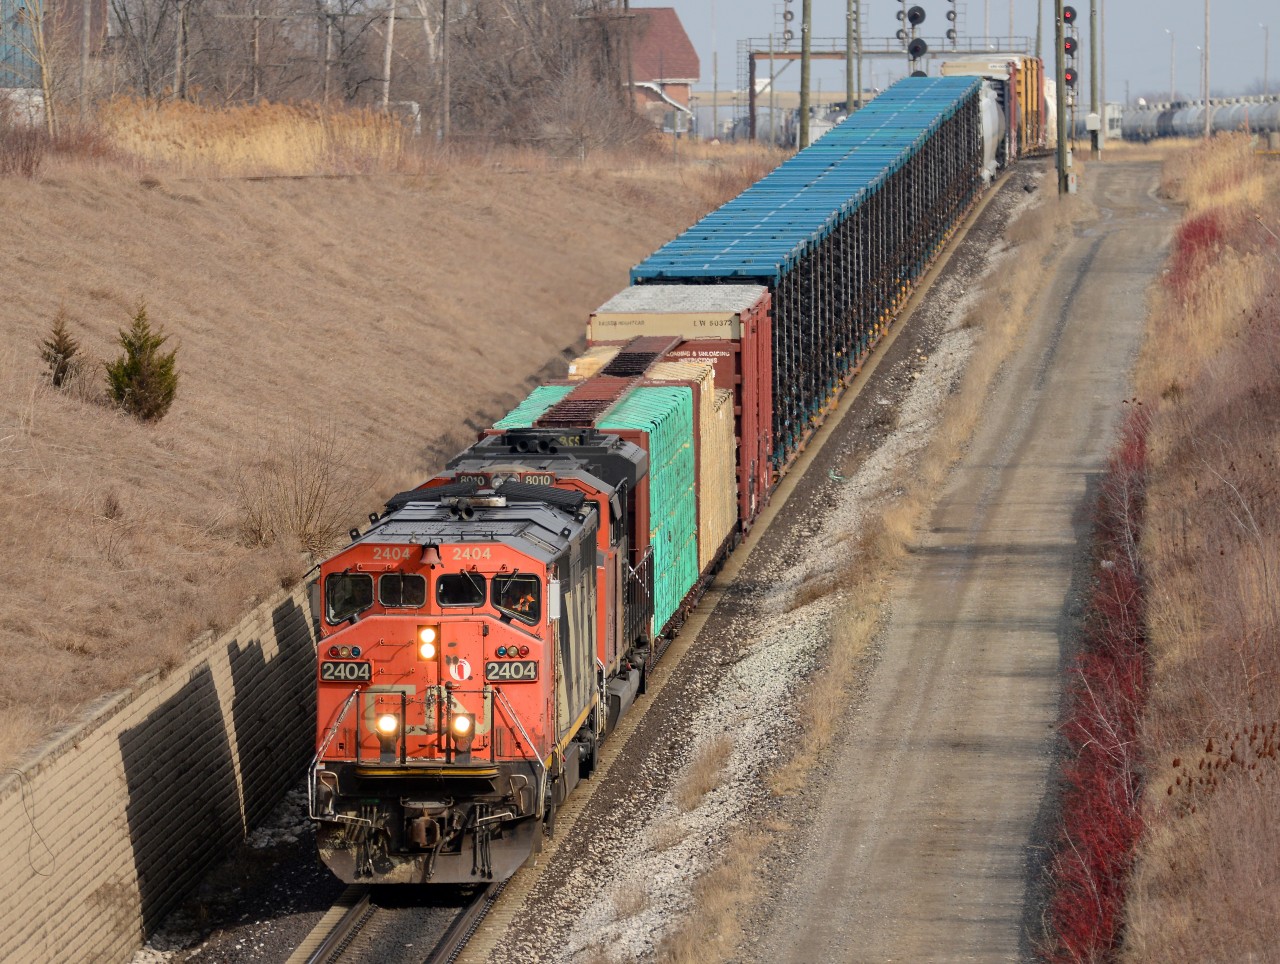 CN 2404 with CN 8010 lead the daily 501 train through the St. Clair River Tunnel to Port Huron, Mi.